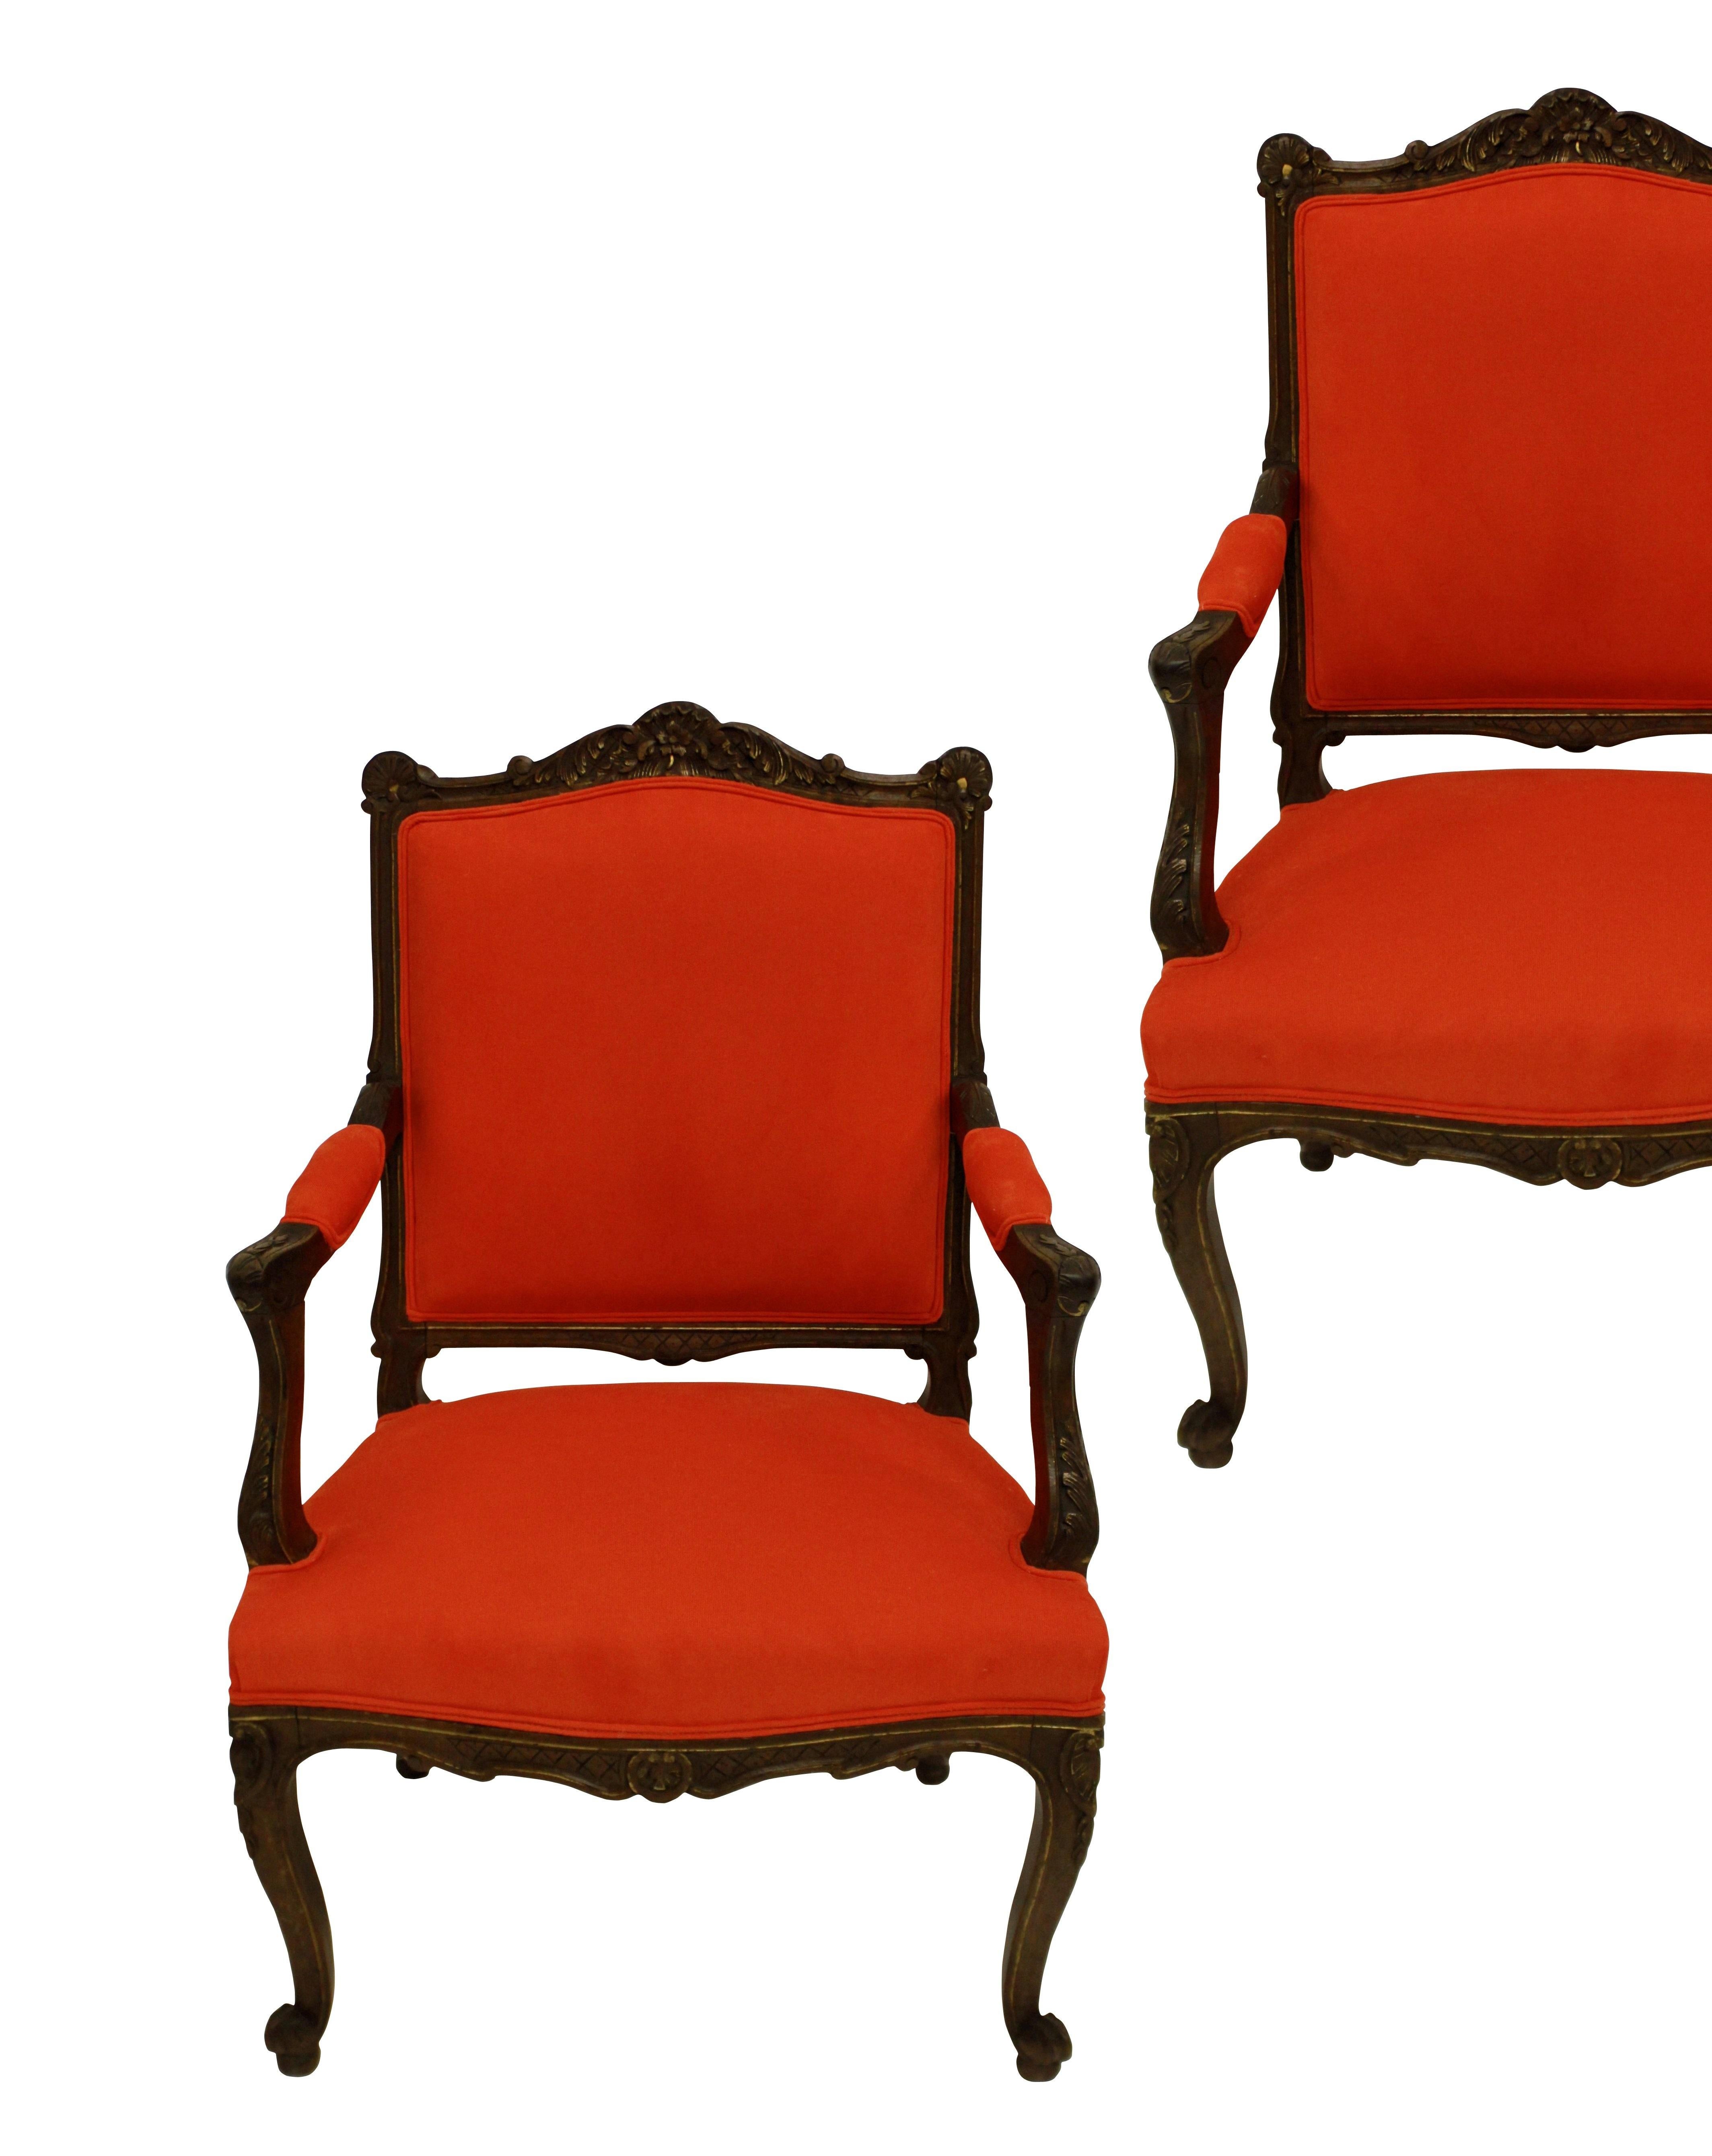 Early 19th Century Pair of French Walnut Armchairs in Burnt Orange Corduroy